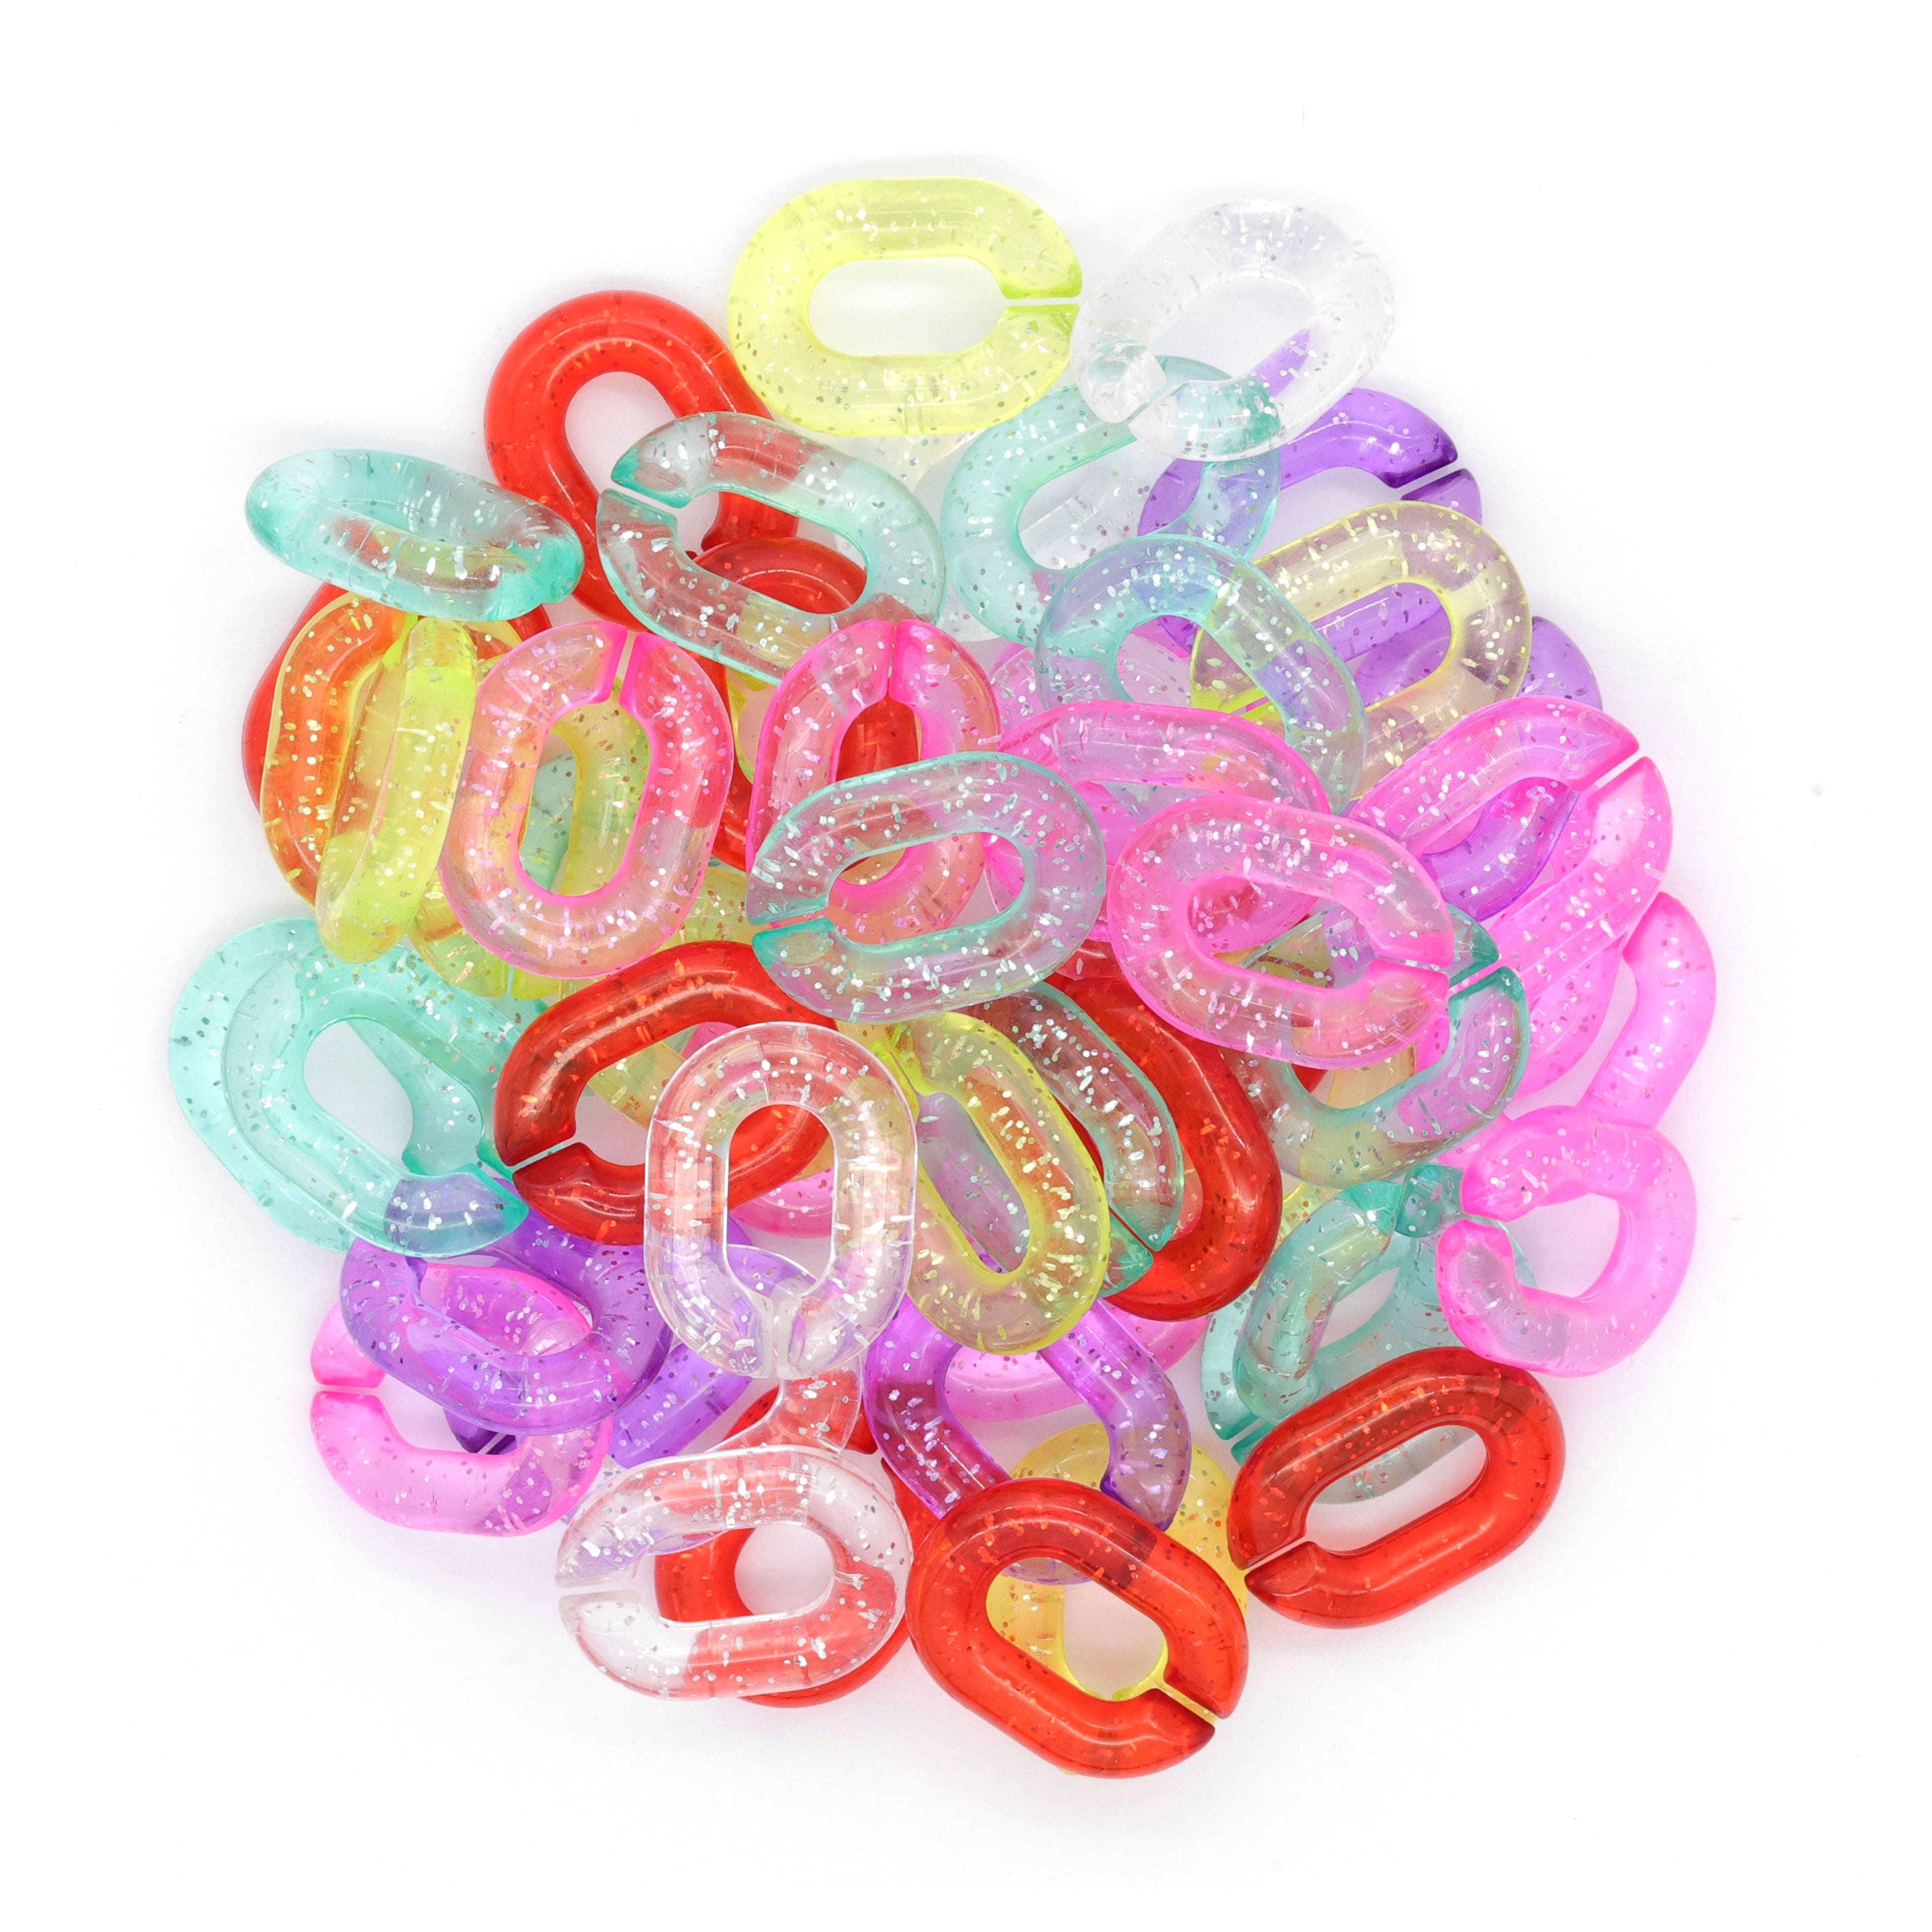 12 Packs: 60 ct. (720 total) Transparent Glitter Plastic Chain Links by Creatology&#x2122;